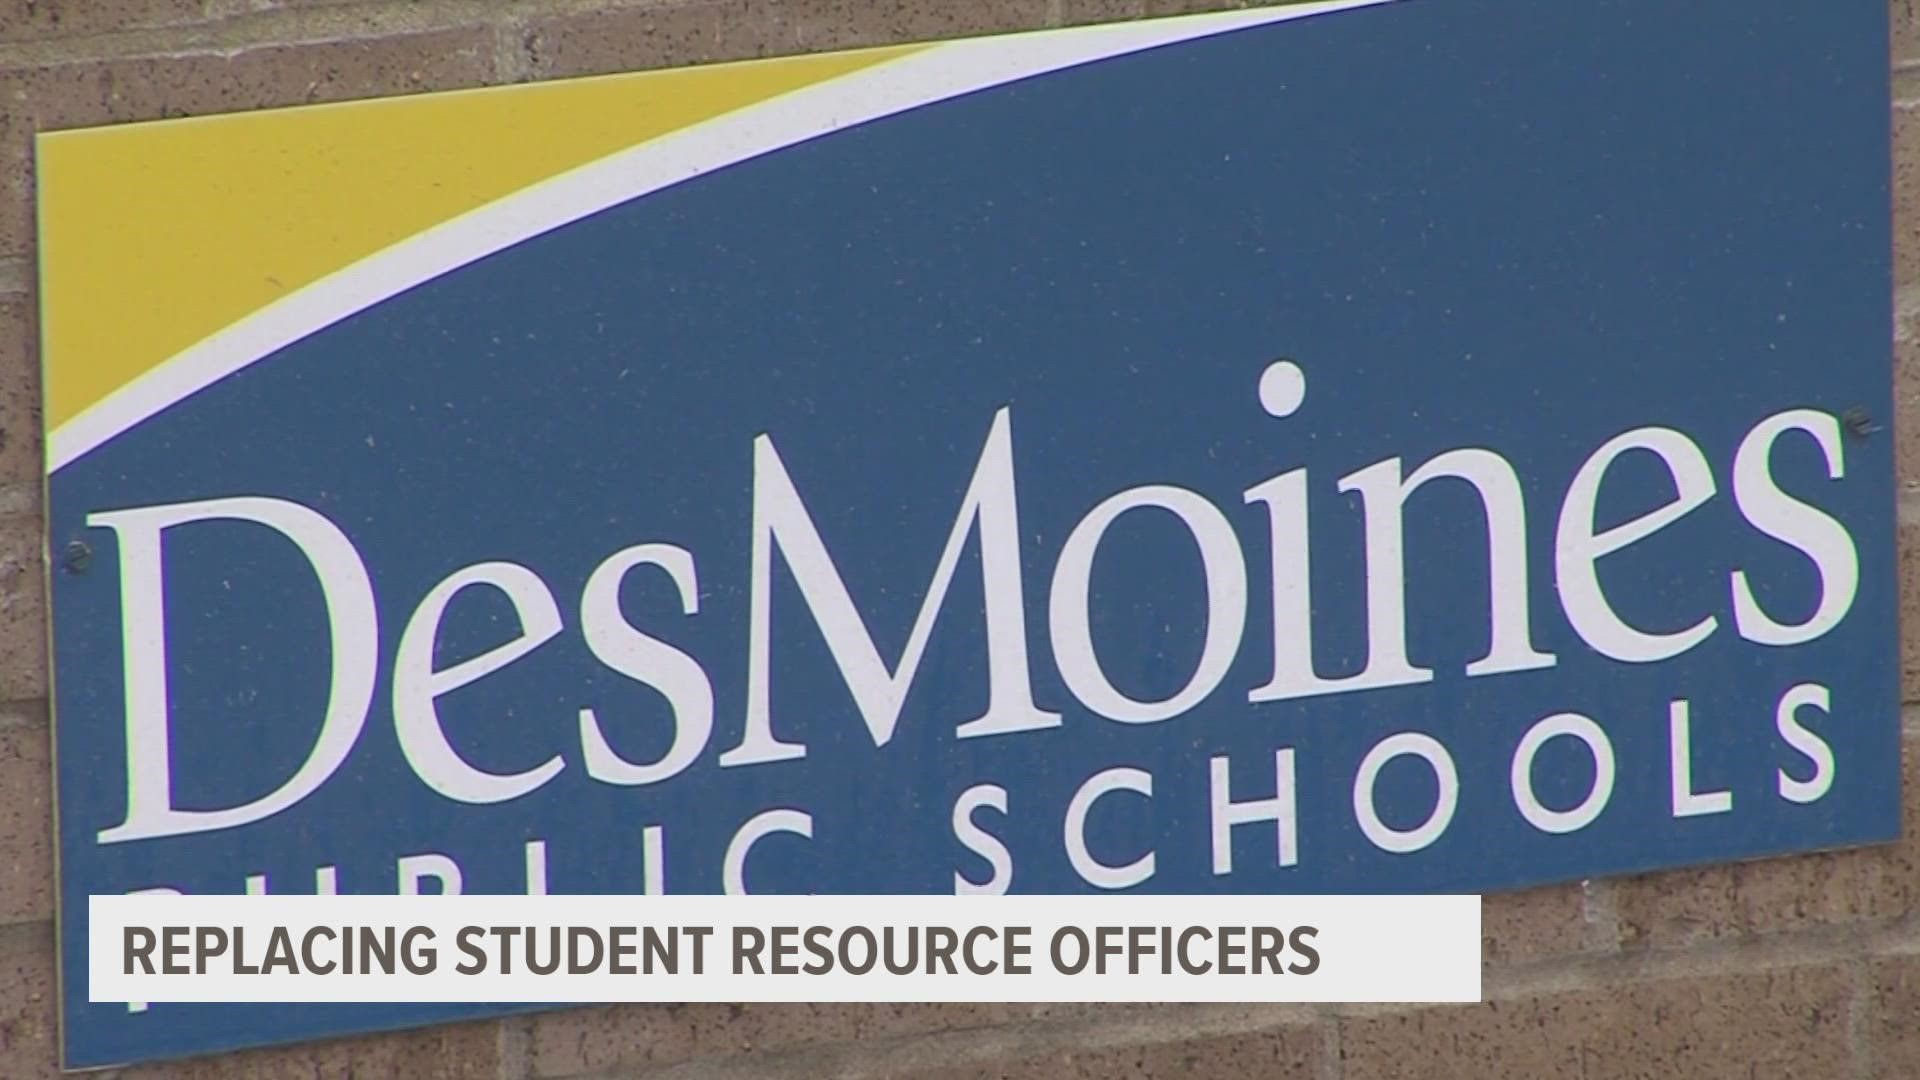 DMPS ended its contract with School Resource Officers earlier this year. In its place, the school district plans to use more restorative measures to stop problems.